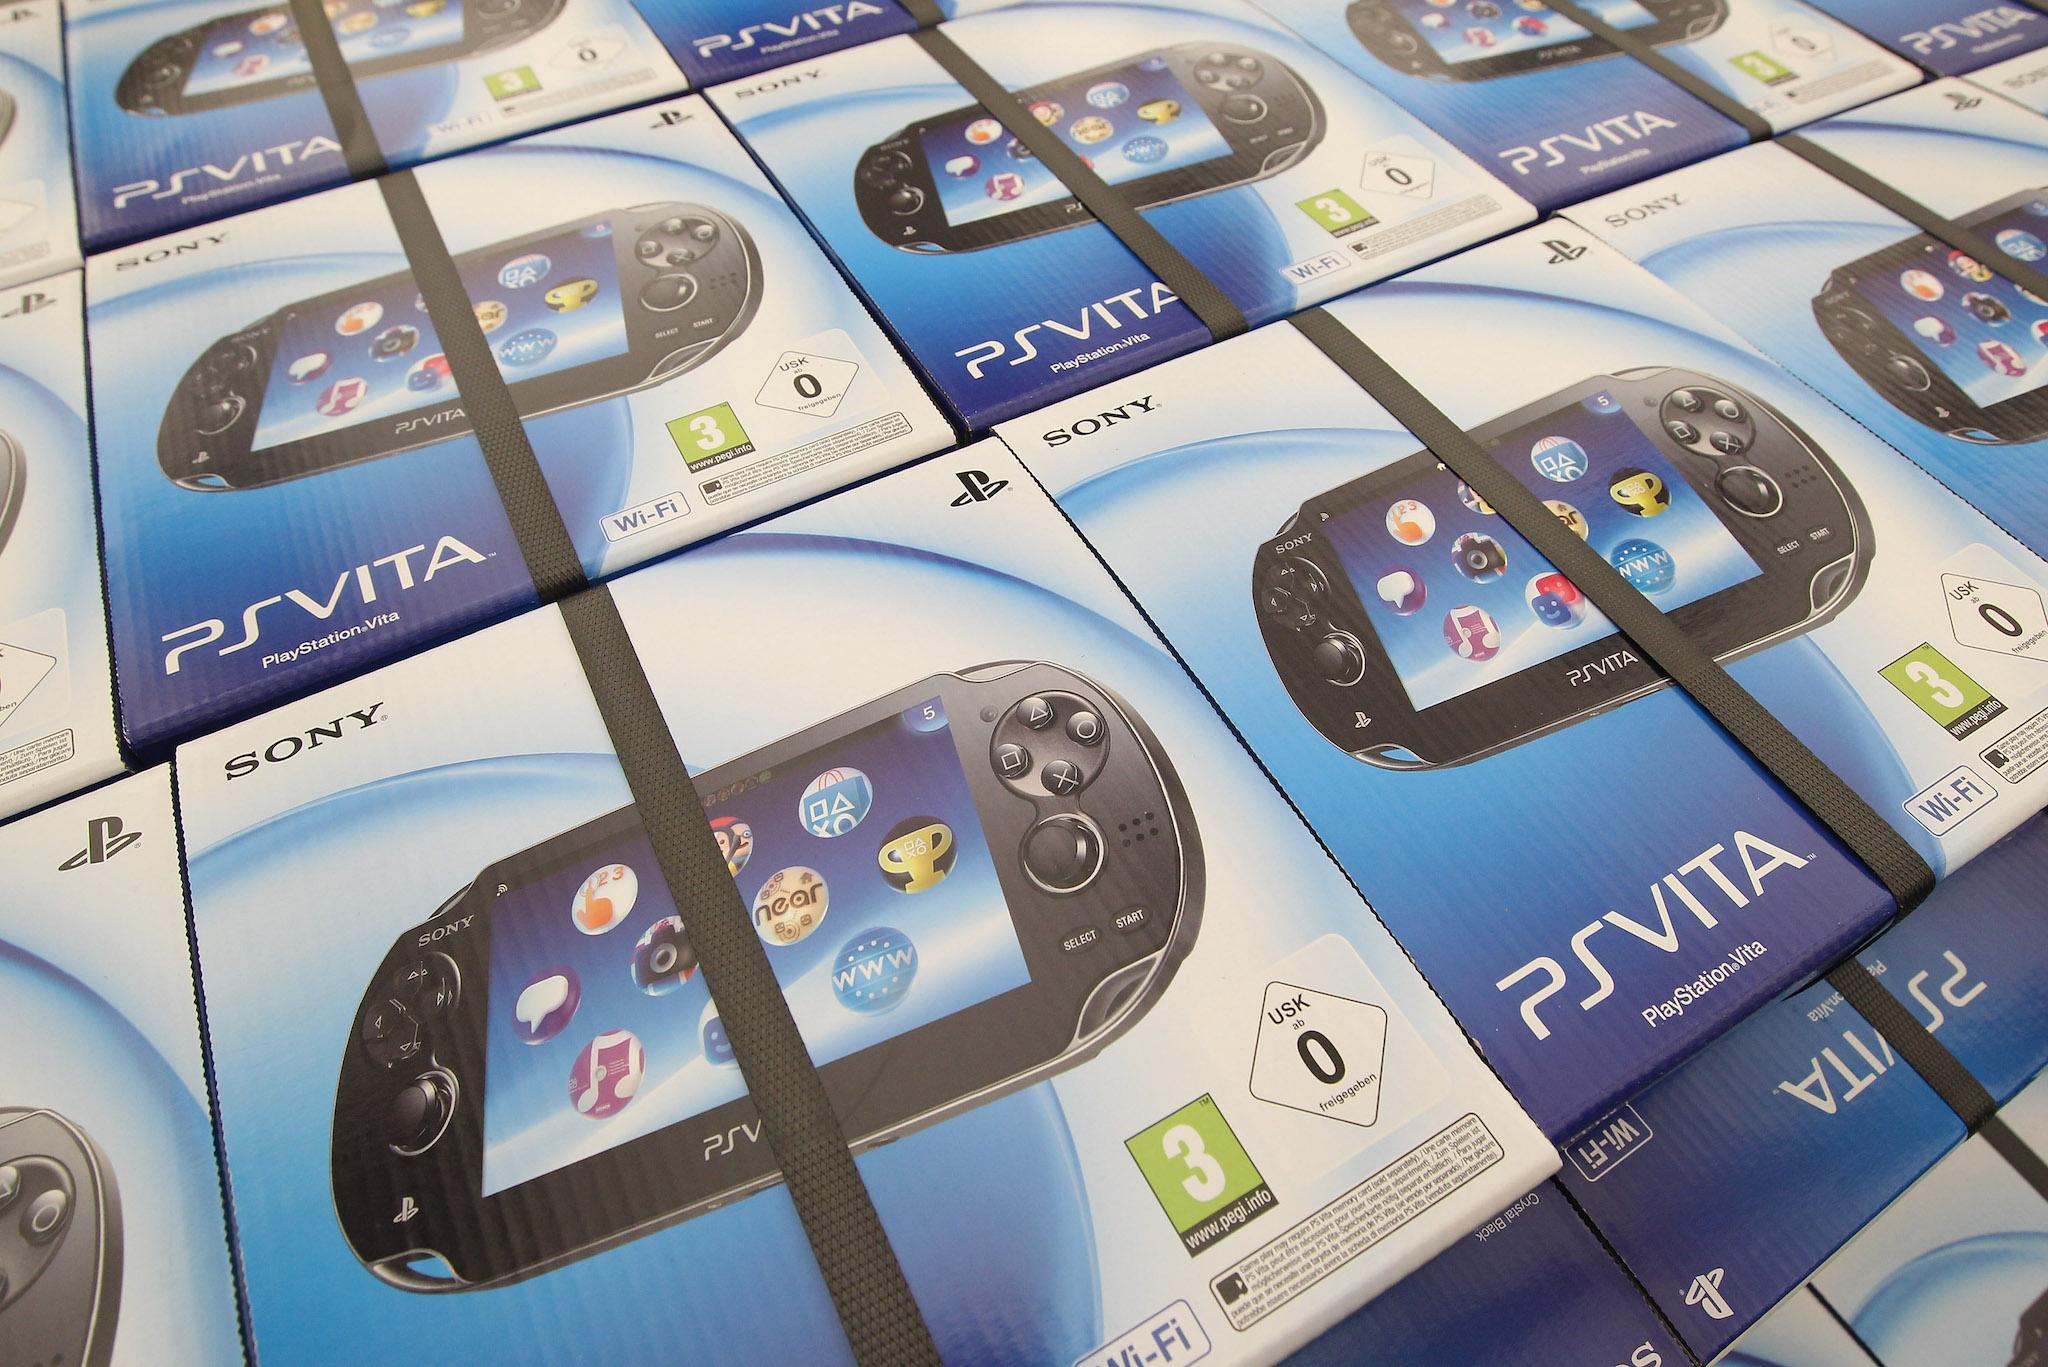 is there a new ps vita coming out